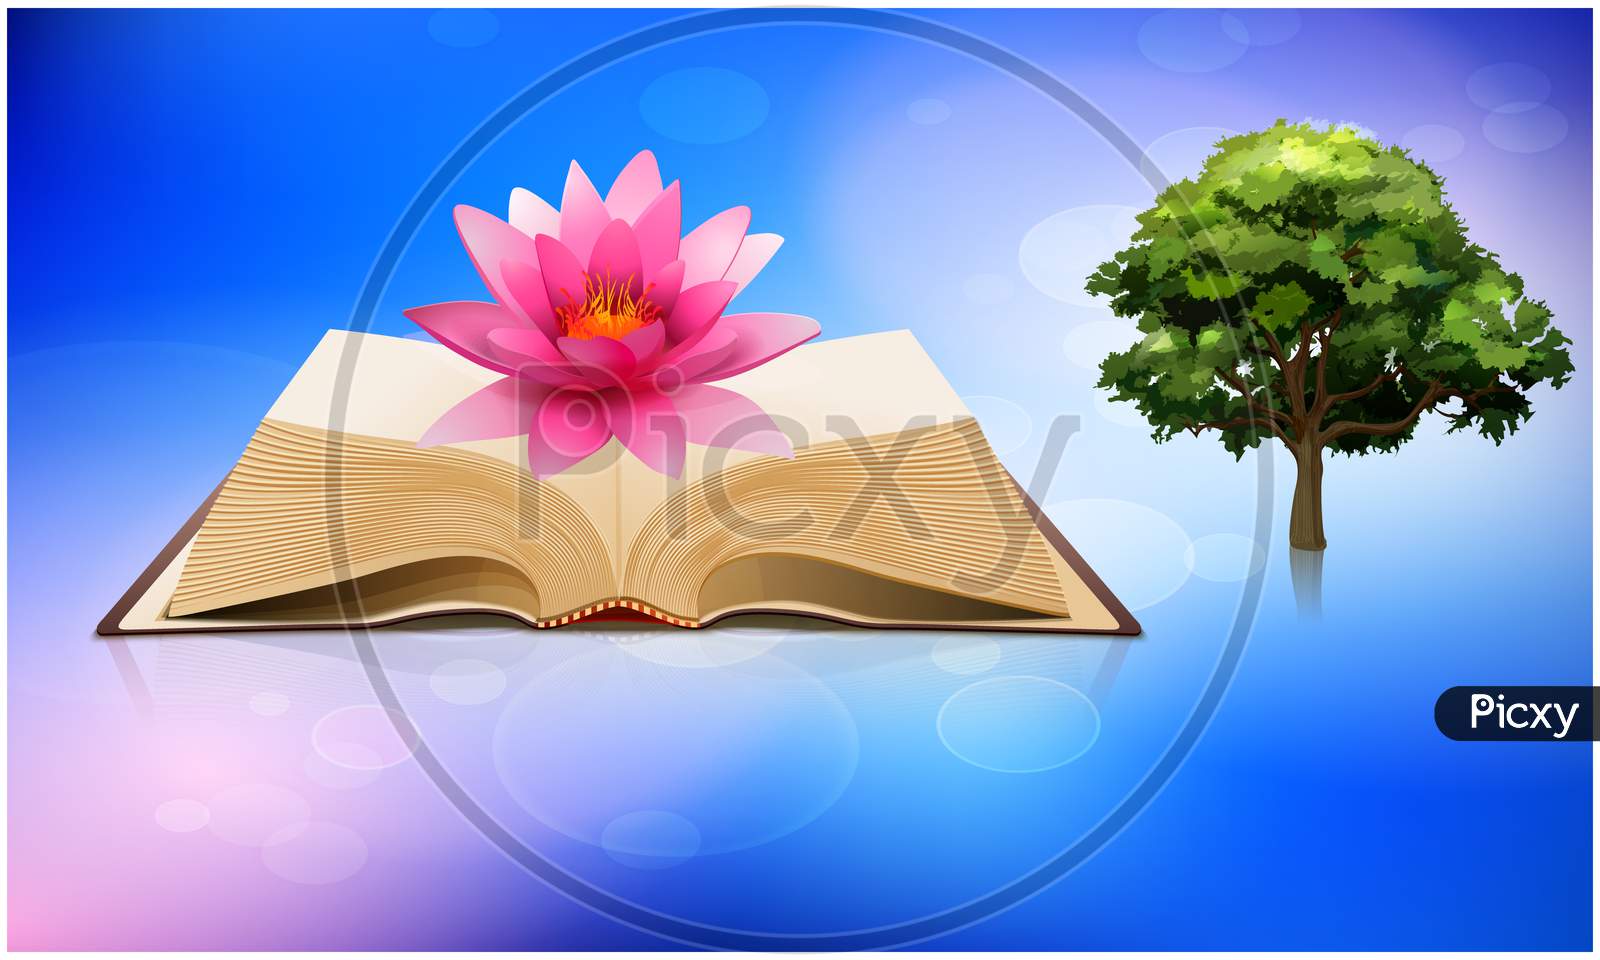 Old Religion Book Contains Lotus Flower And Tree On Abstract Sky Background